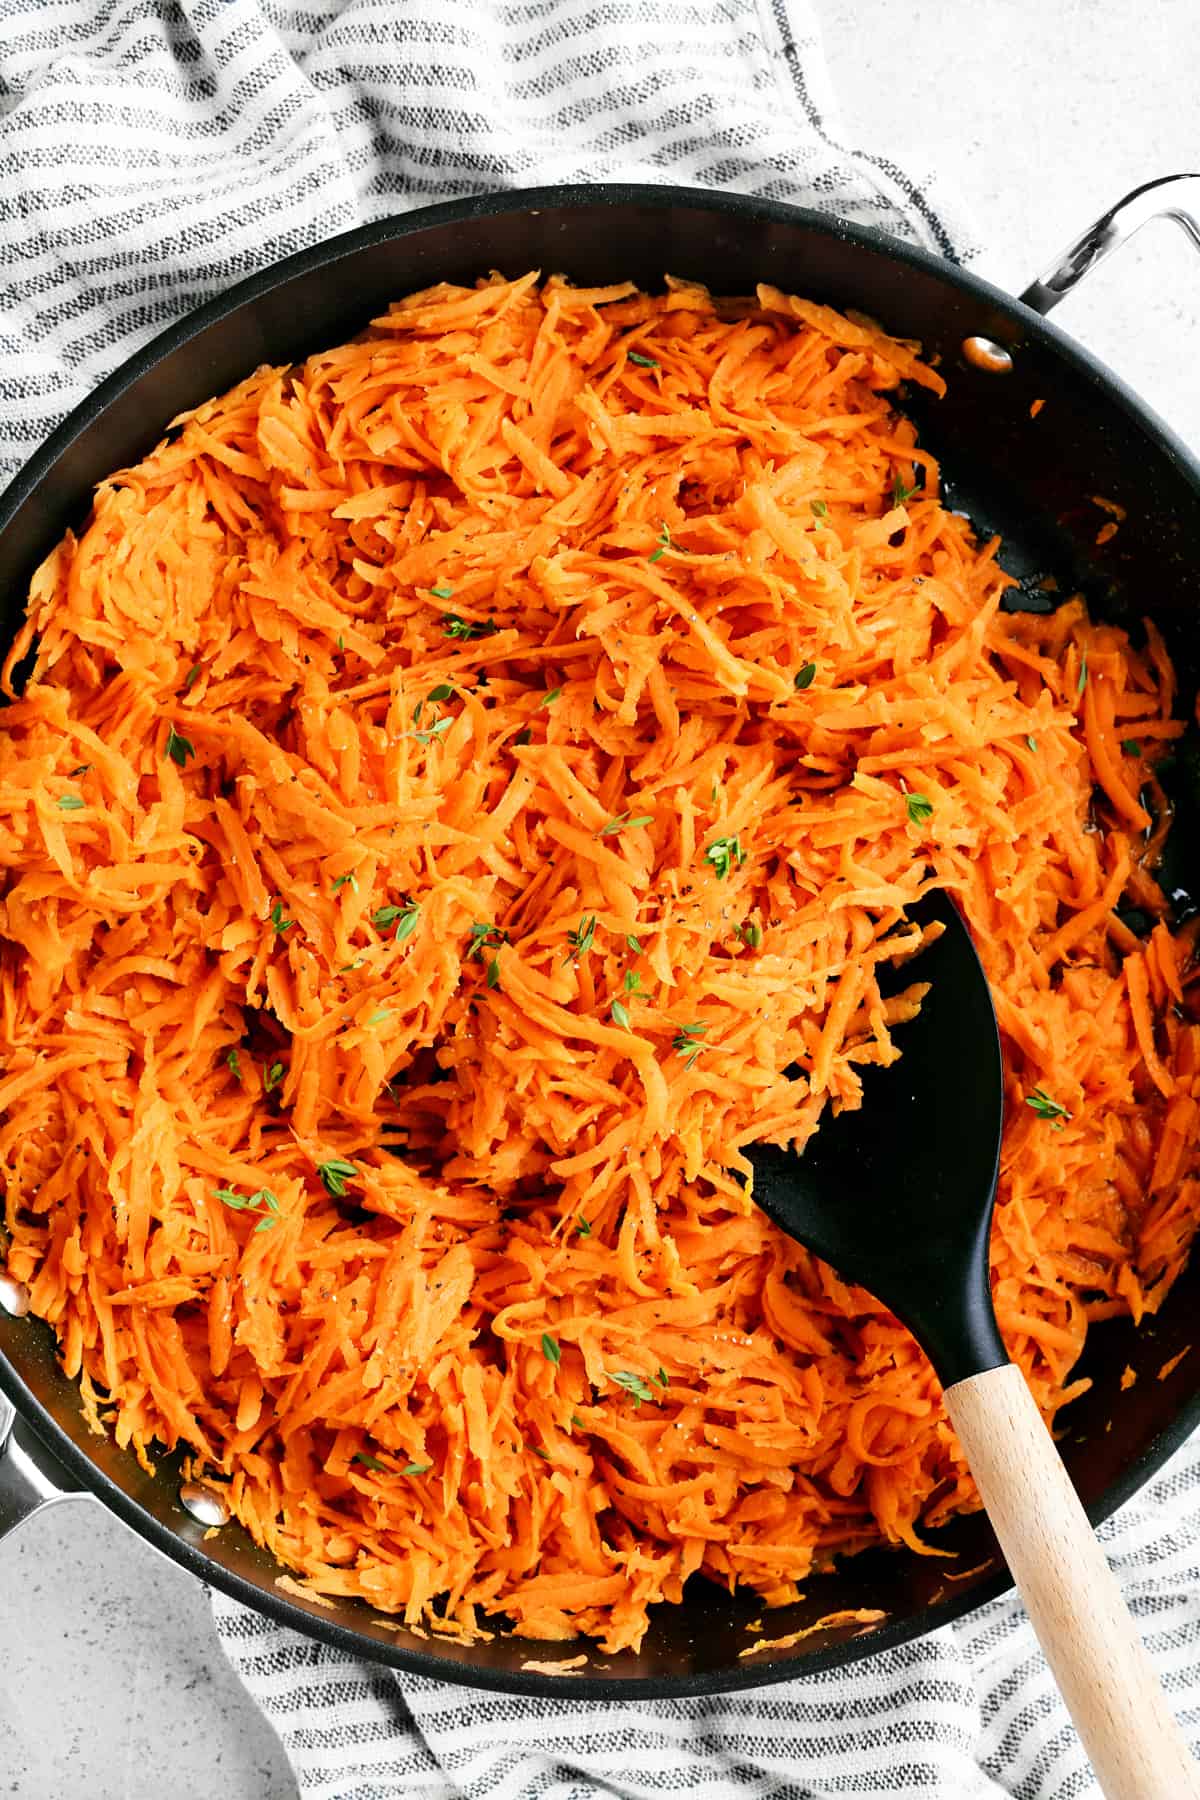 a spatula in the shredded carrots which are in a pan